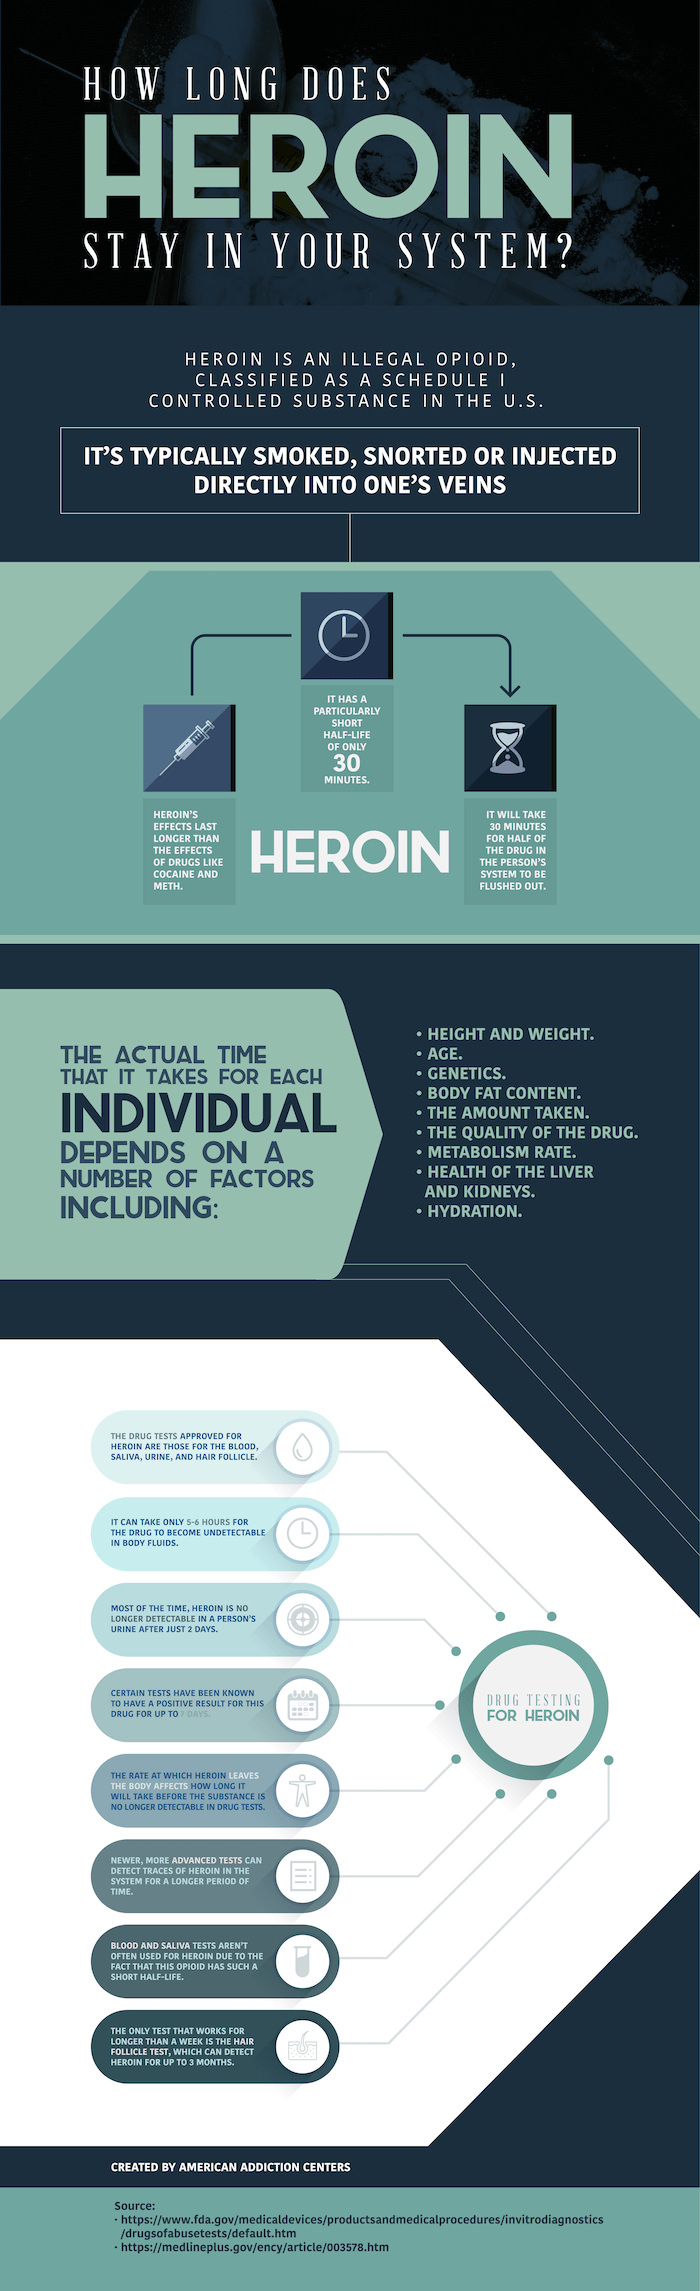 How Long Does It Take to Get Addicted to Heroin?